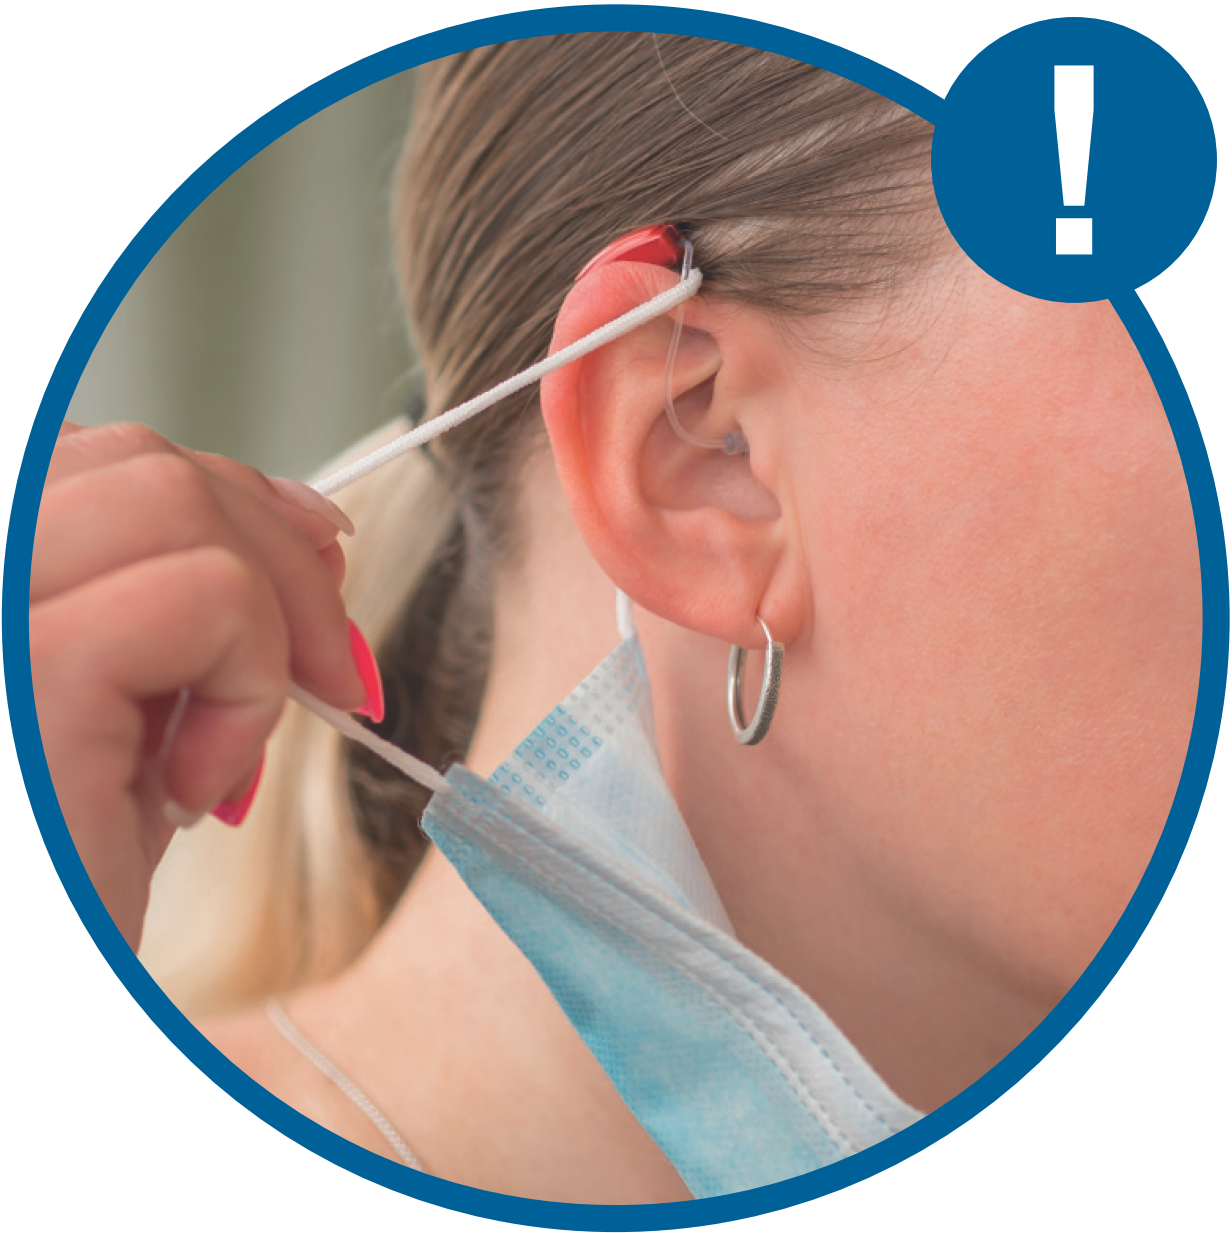 Protect against loss of the hearing aid - remove mouth-nose protection correctly